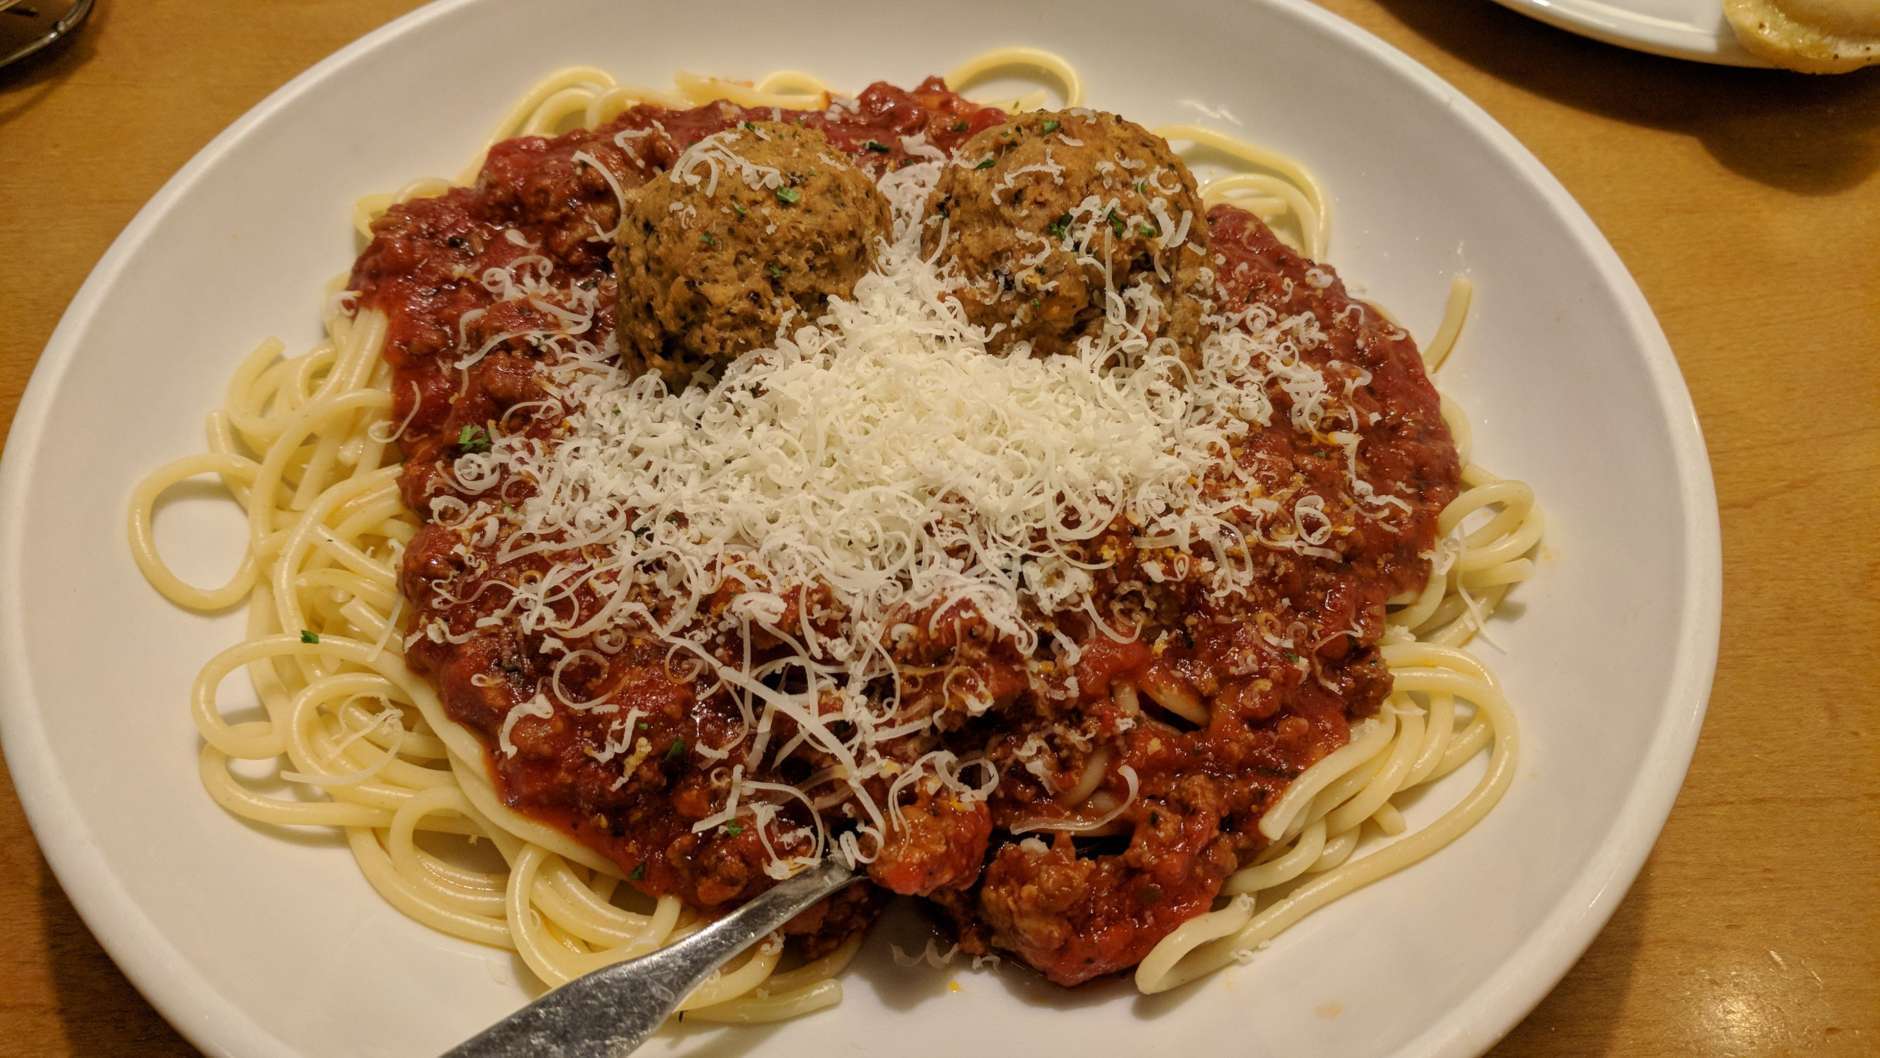 The meal: Spaghetti with traditional meat sauce and meatballs. (WTOP/Brandon Millman)